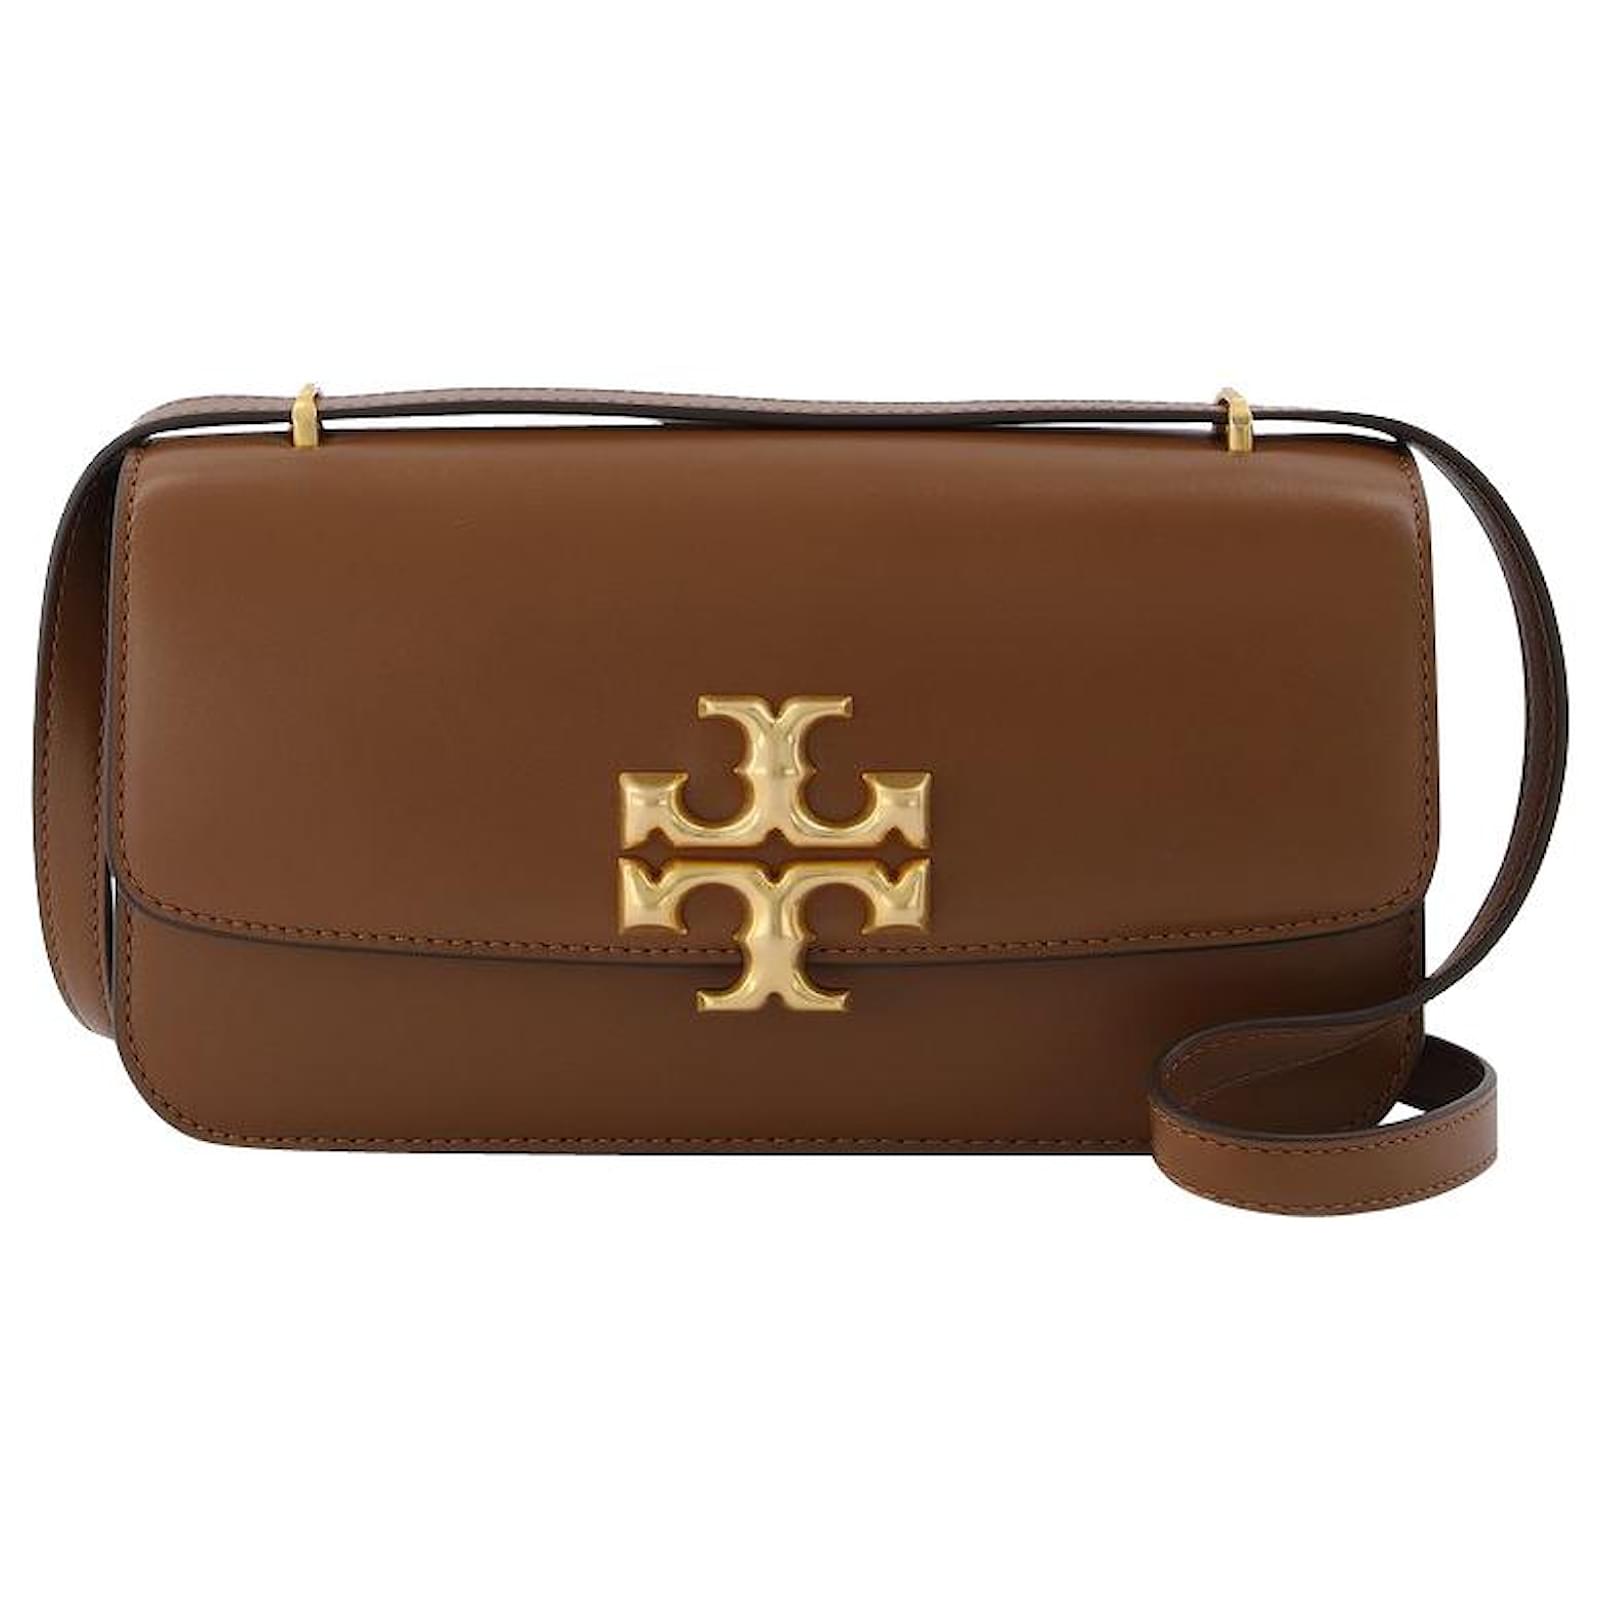 Tory Burch Eleanor E/W Small Convertible Shoulder Bag in brown leather ...